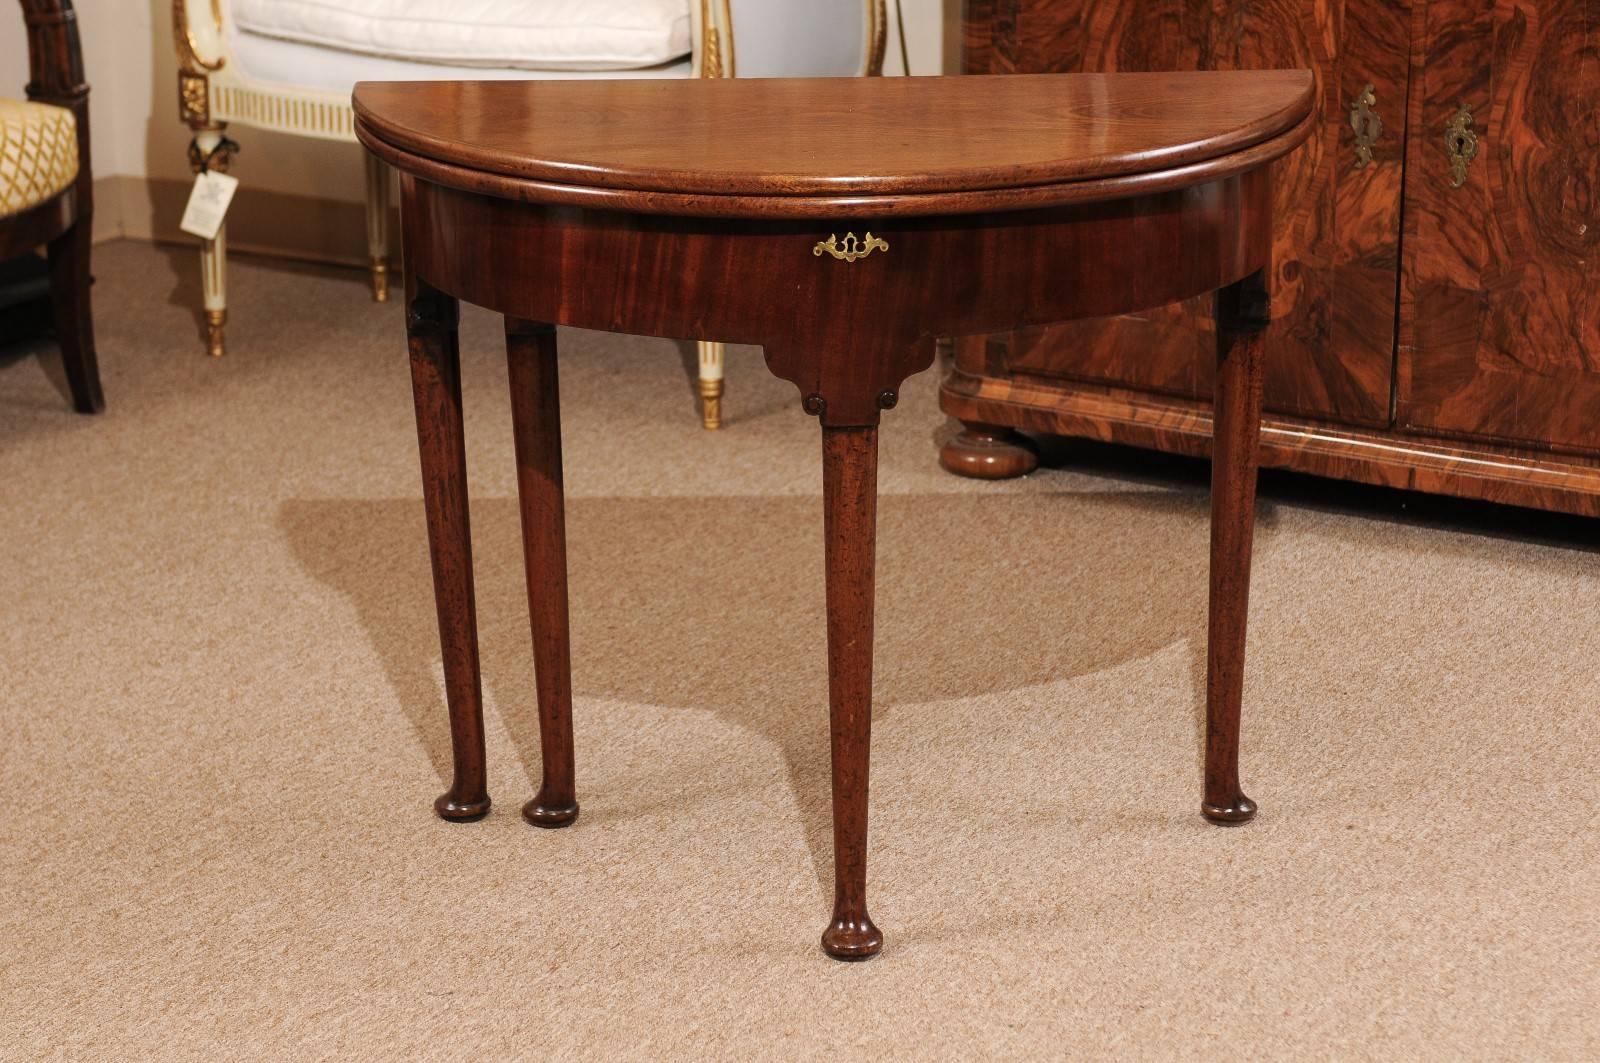 18th century English flip-top demilune-shaped console table in mahogany on pad feet, opens to circular game table with wood top.